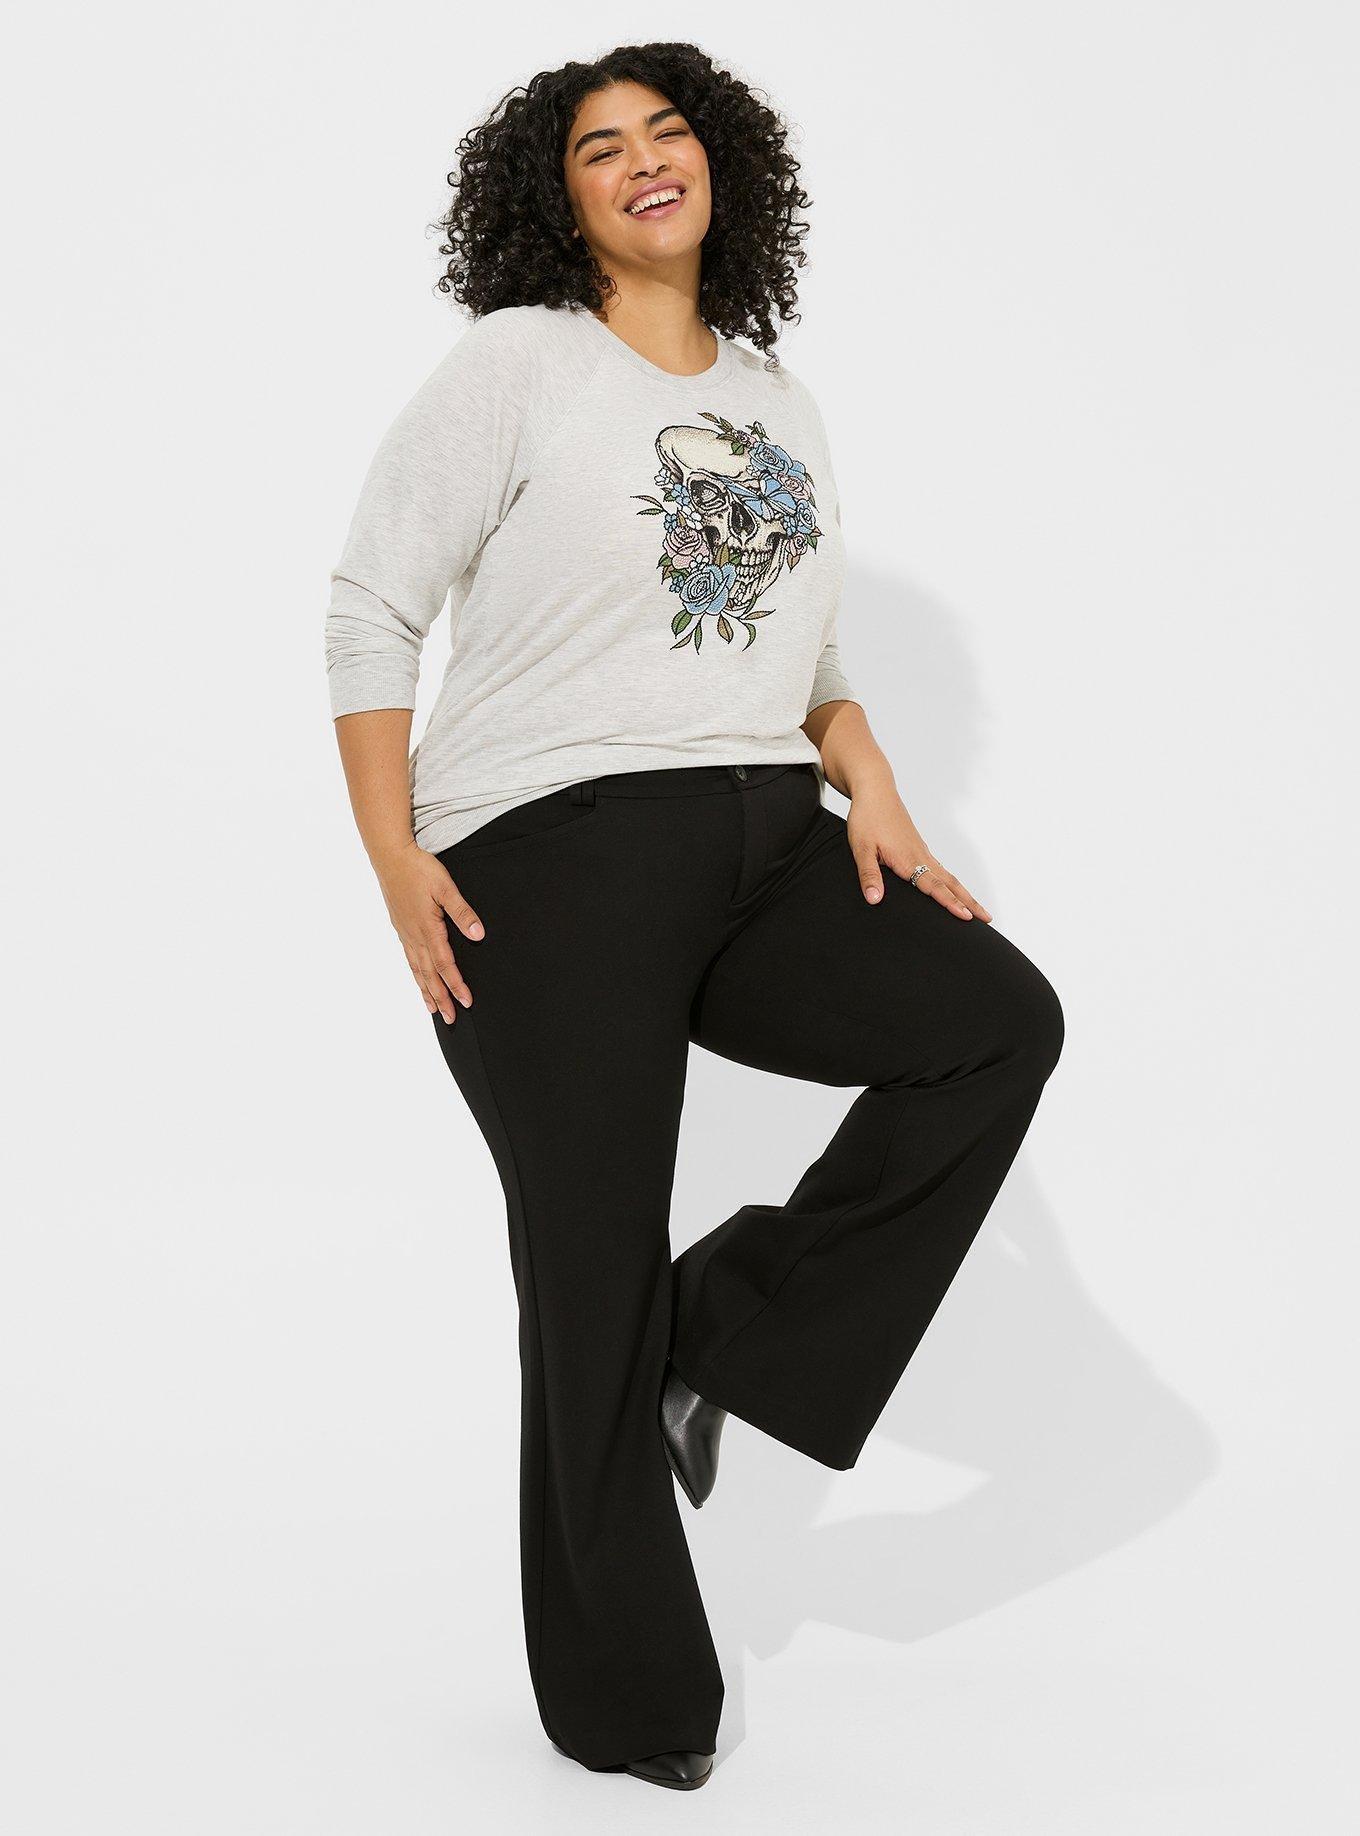 Style & Co. Plus Size High-rise Bootcut Ponte Pants in Blue